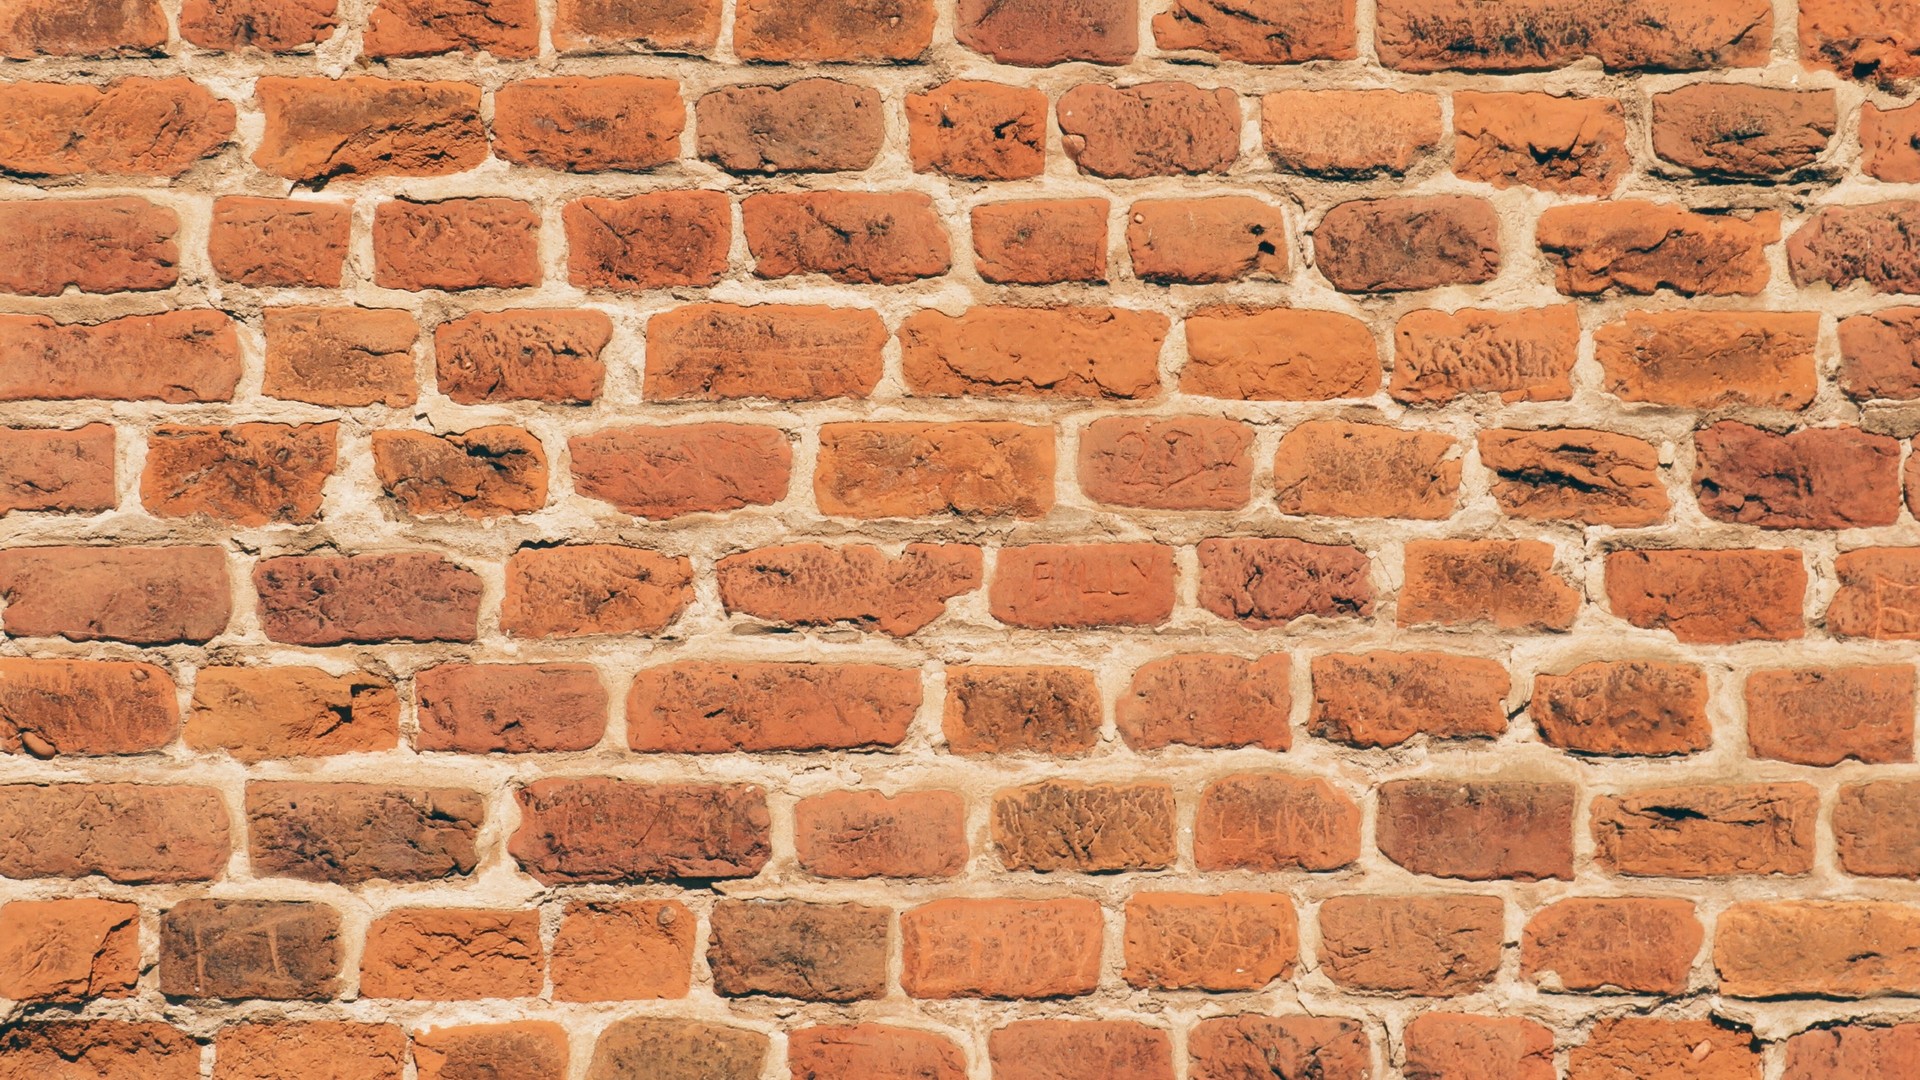 Computer Wallpapers Brick With high-resolution 1920X1080 pixel. You can use this wallpaper for your Windows and Mac OS computers as well as your Android and iPhone smartphones